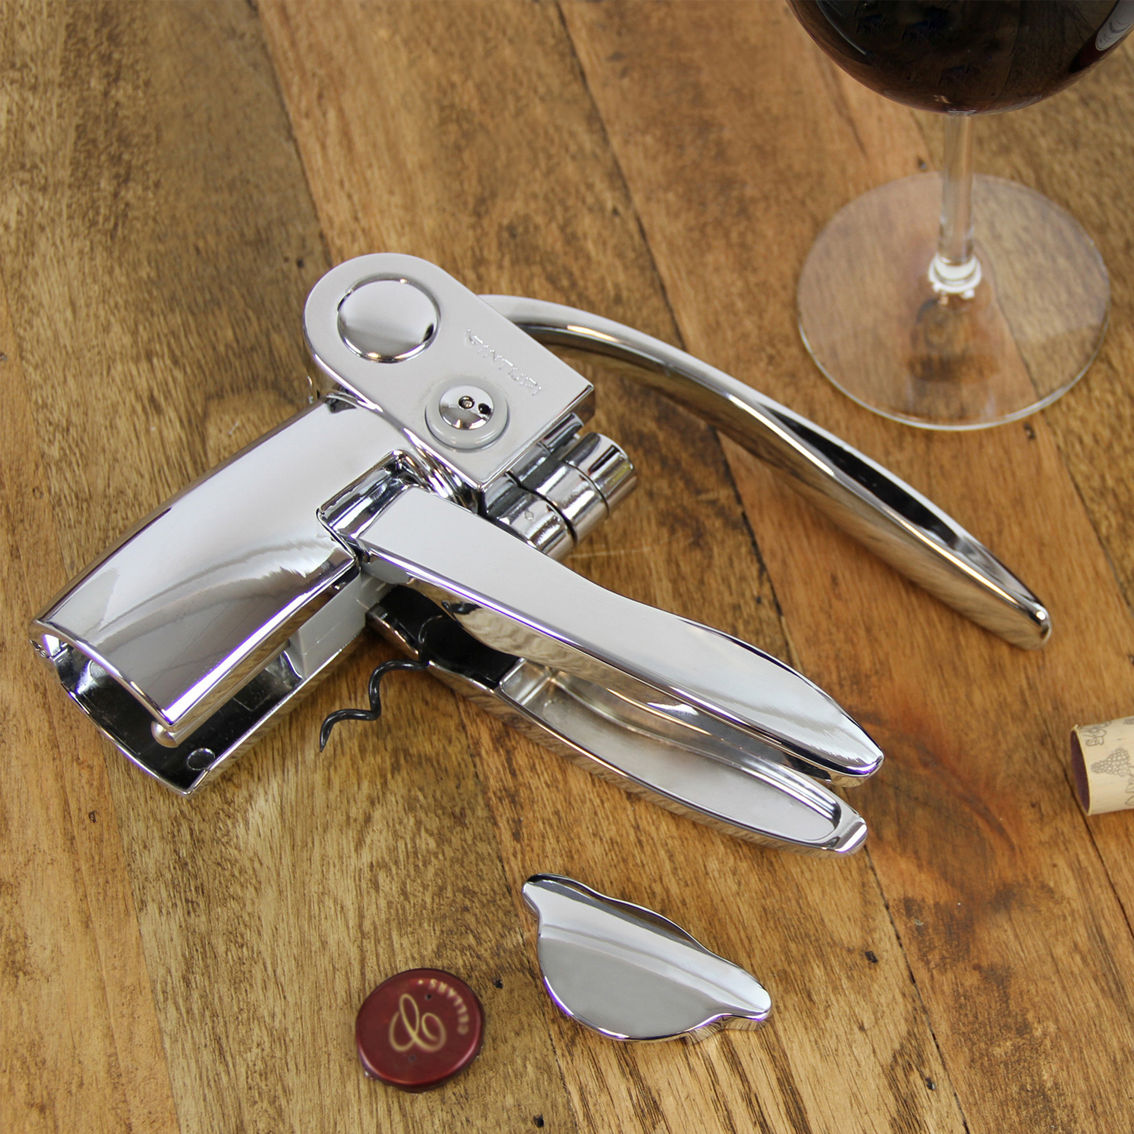 Vinturi Traditional Wine Lever Opener and Foil Cutter with Gift Box - Image 2 of 3